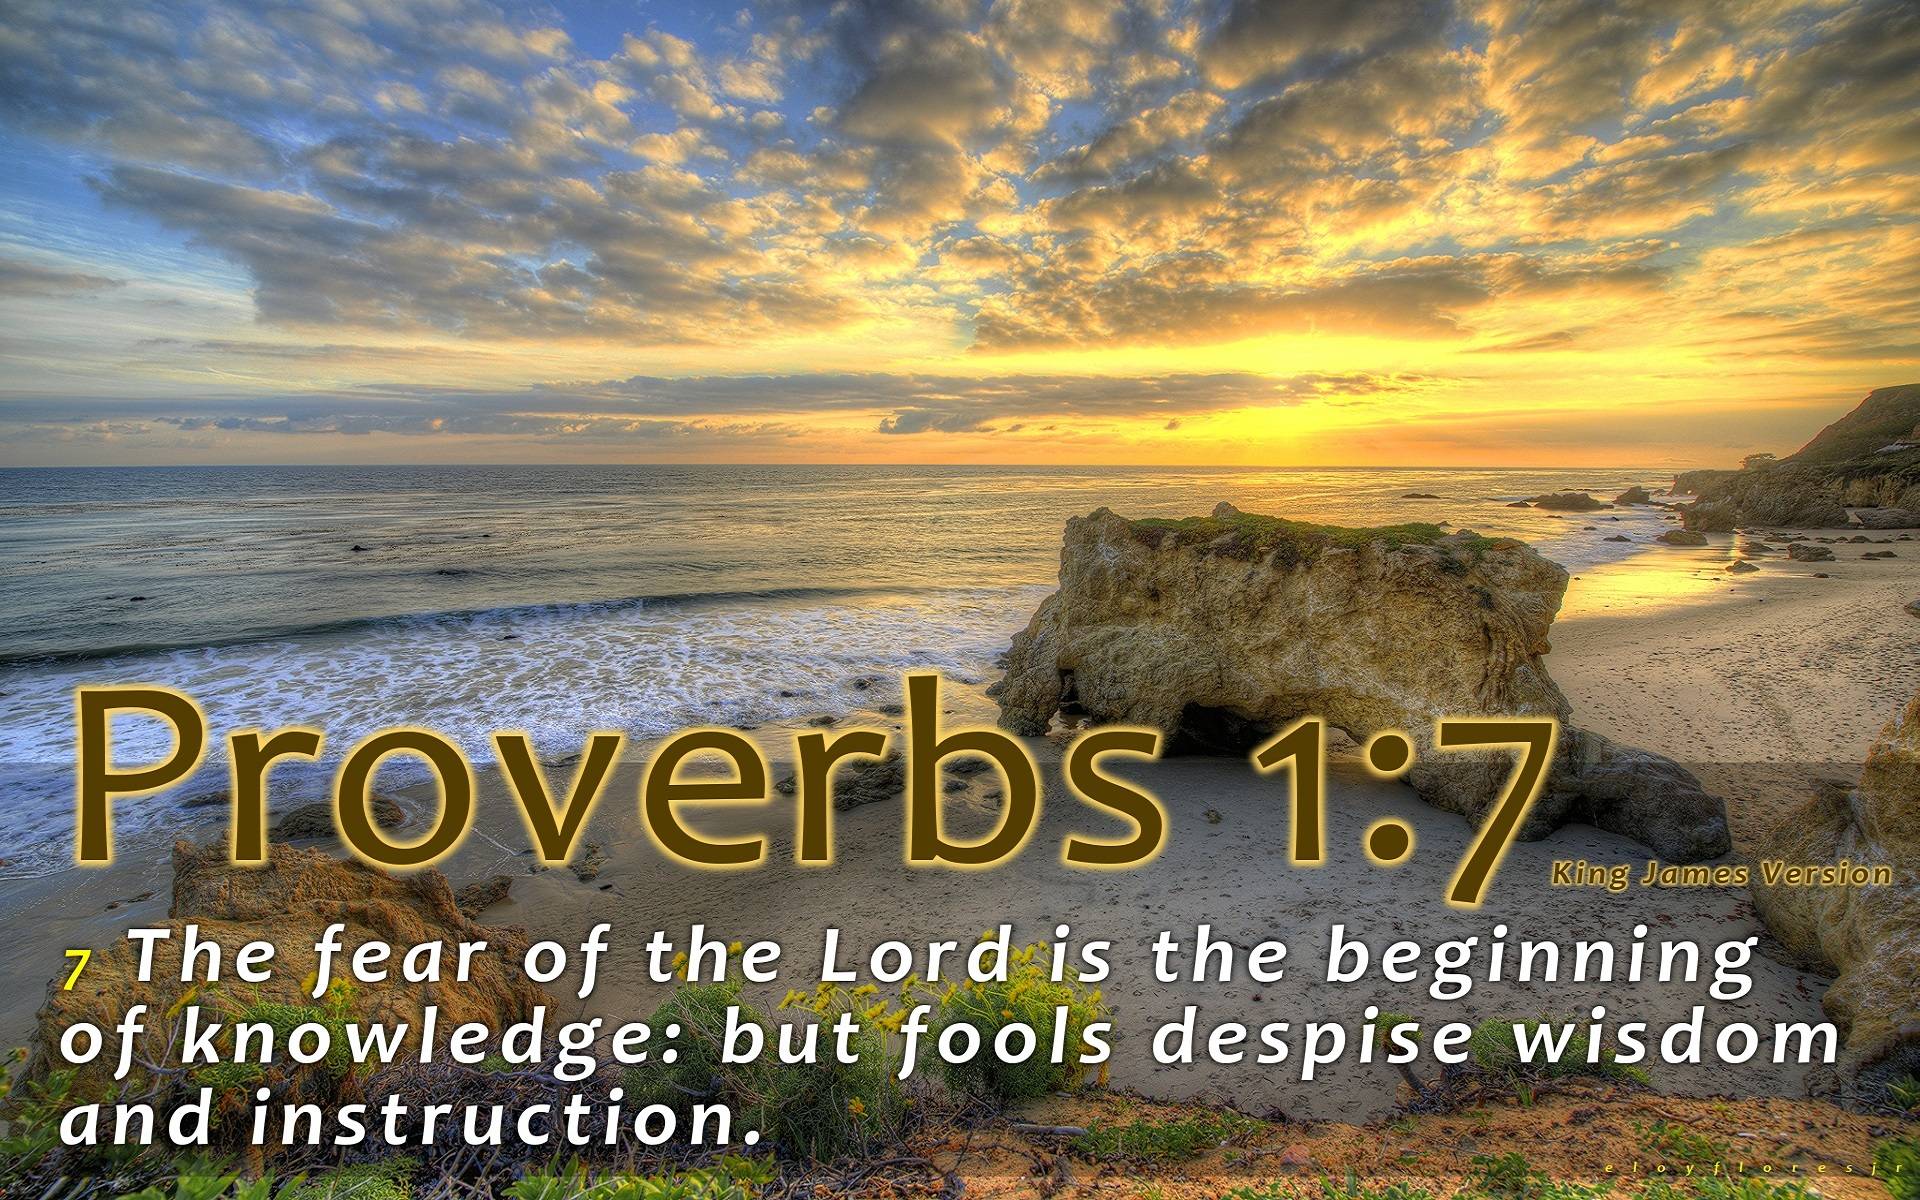 Quotes For > Proverbs Wallpaper